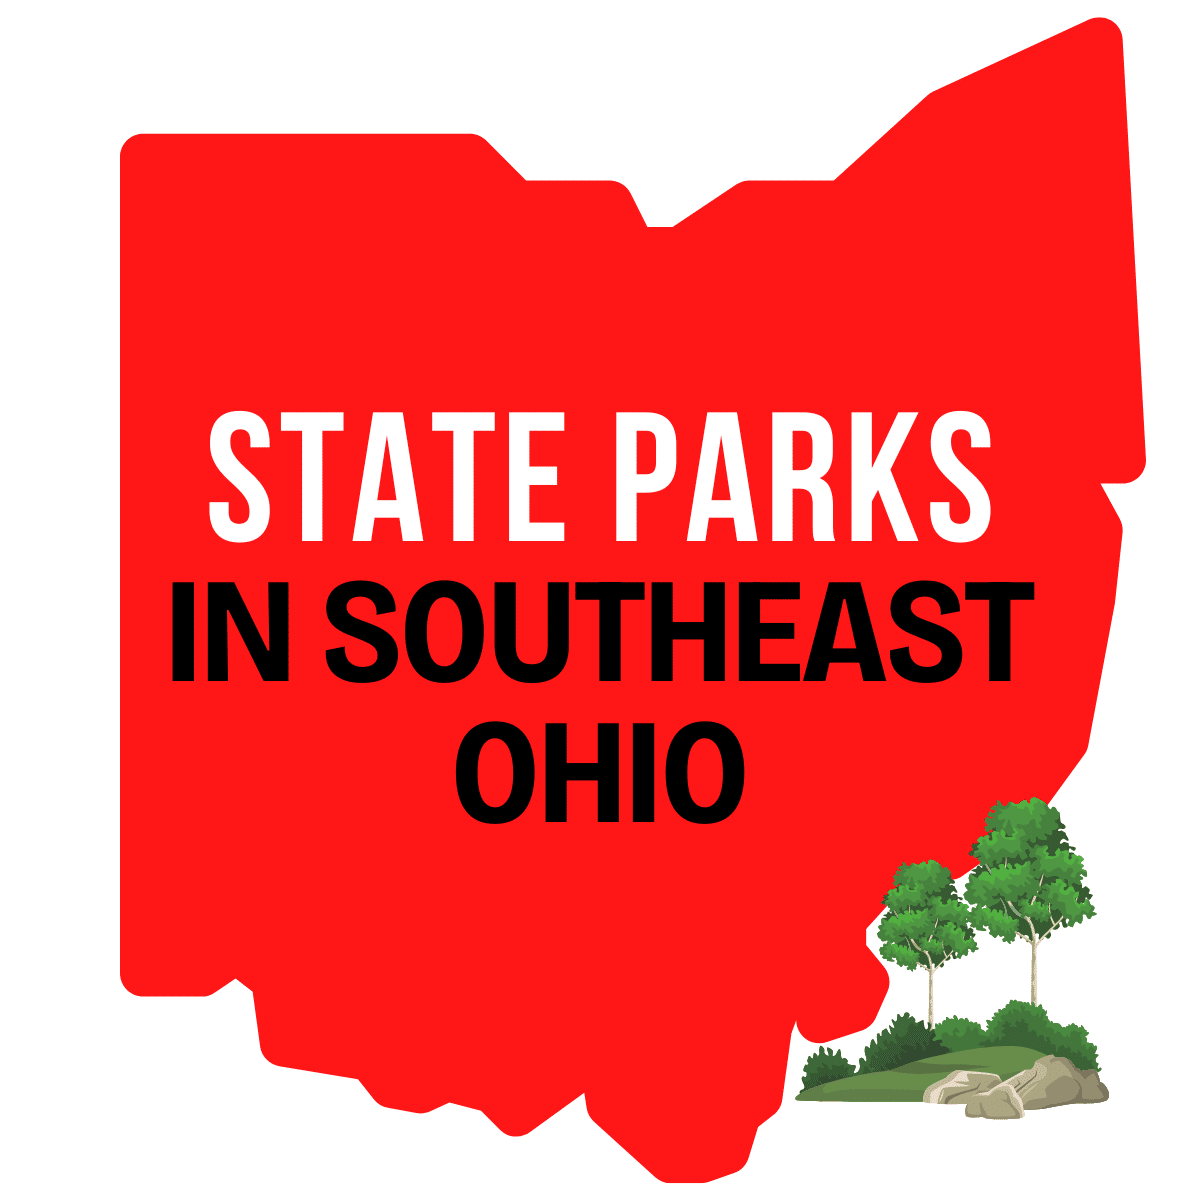 square image with a large red map of Ohio containing the text State Parks in Southeast Ohio with a small clipart image of trees in the bottom right corner